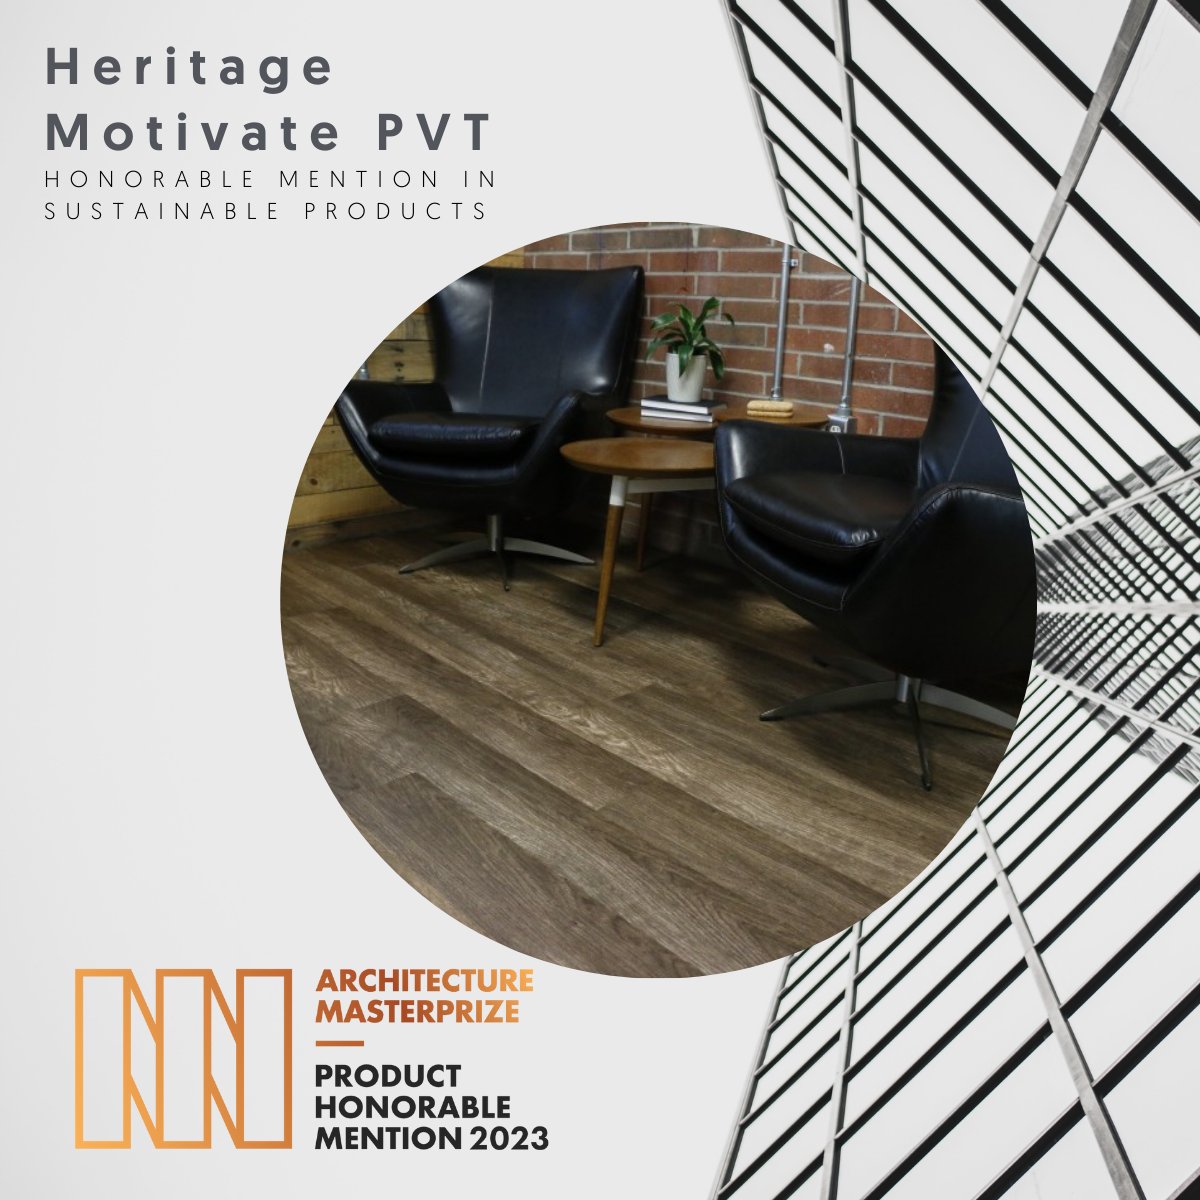 The future of performance vinyl tile is proving to be unstoppable!

Ecore’s Heritage Motivate PVT won an honorable mention in the sustainable products category for Architecture MasterPrize’s Architectural Product Design Awards for 2023.

#performanceflooring #flooring #ecore